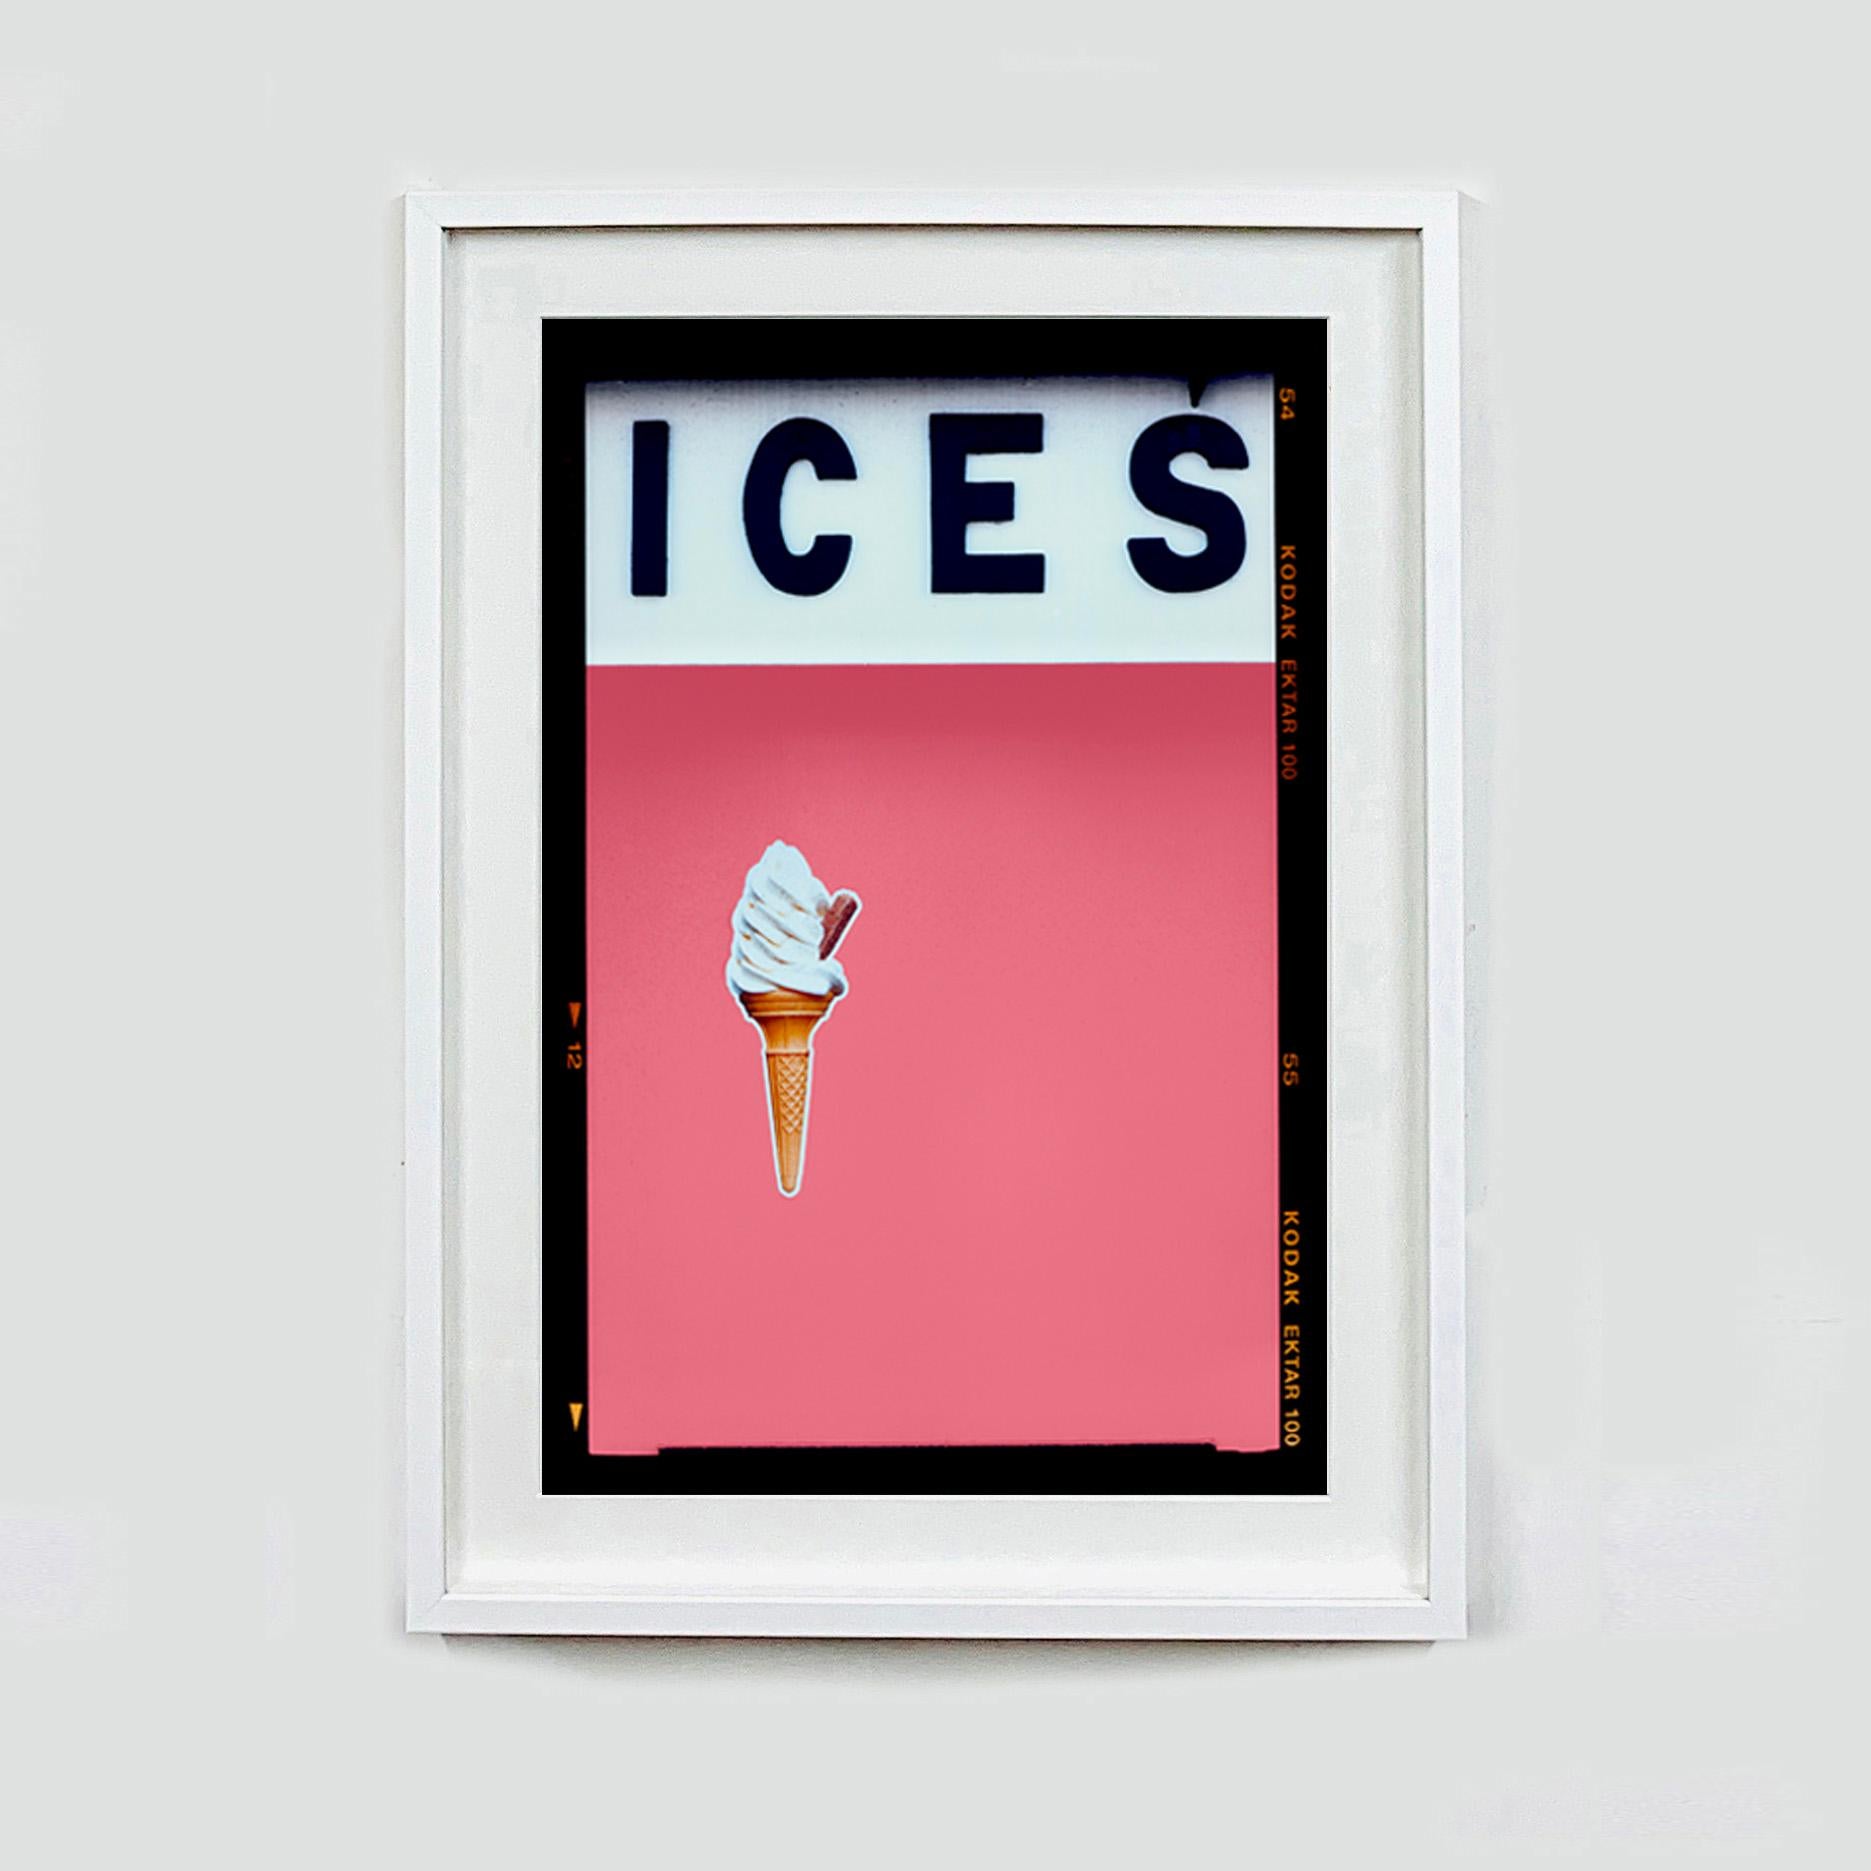 Ices (Coral), Bexhill-on-Sea - British seaside color photography - Pop Art Photograph by Richard Heeps